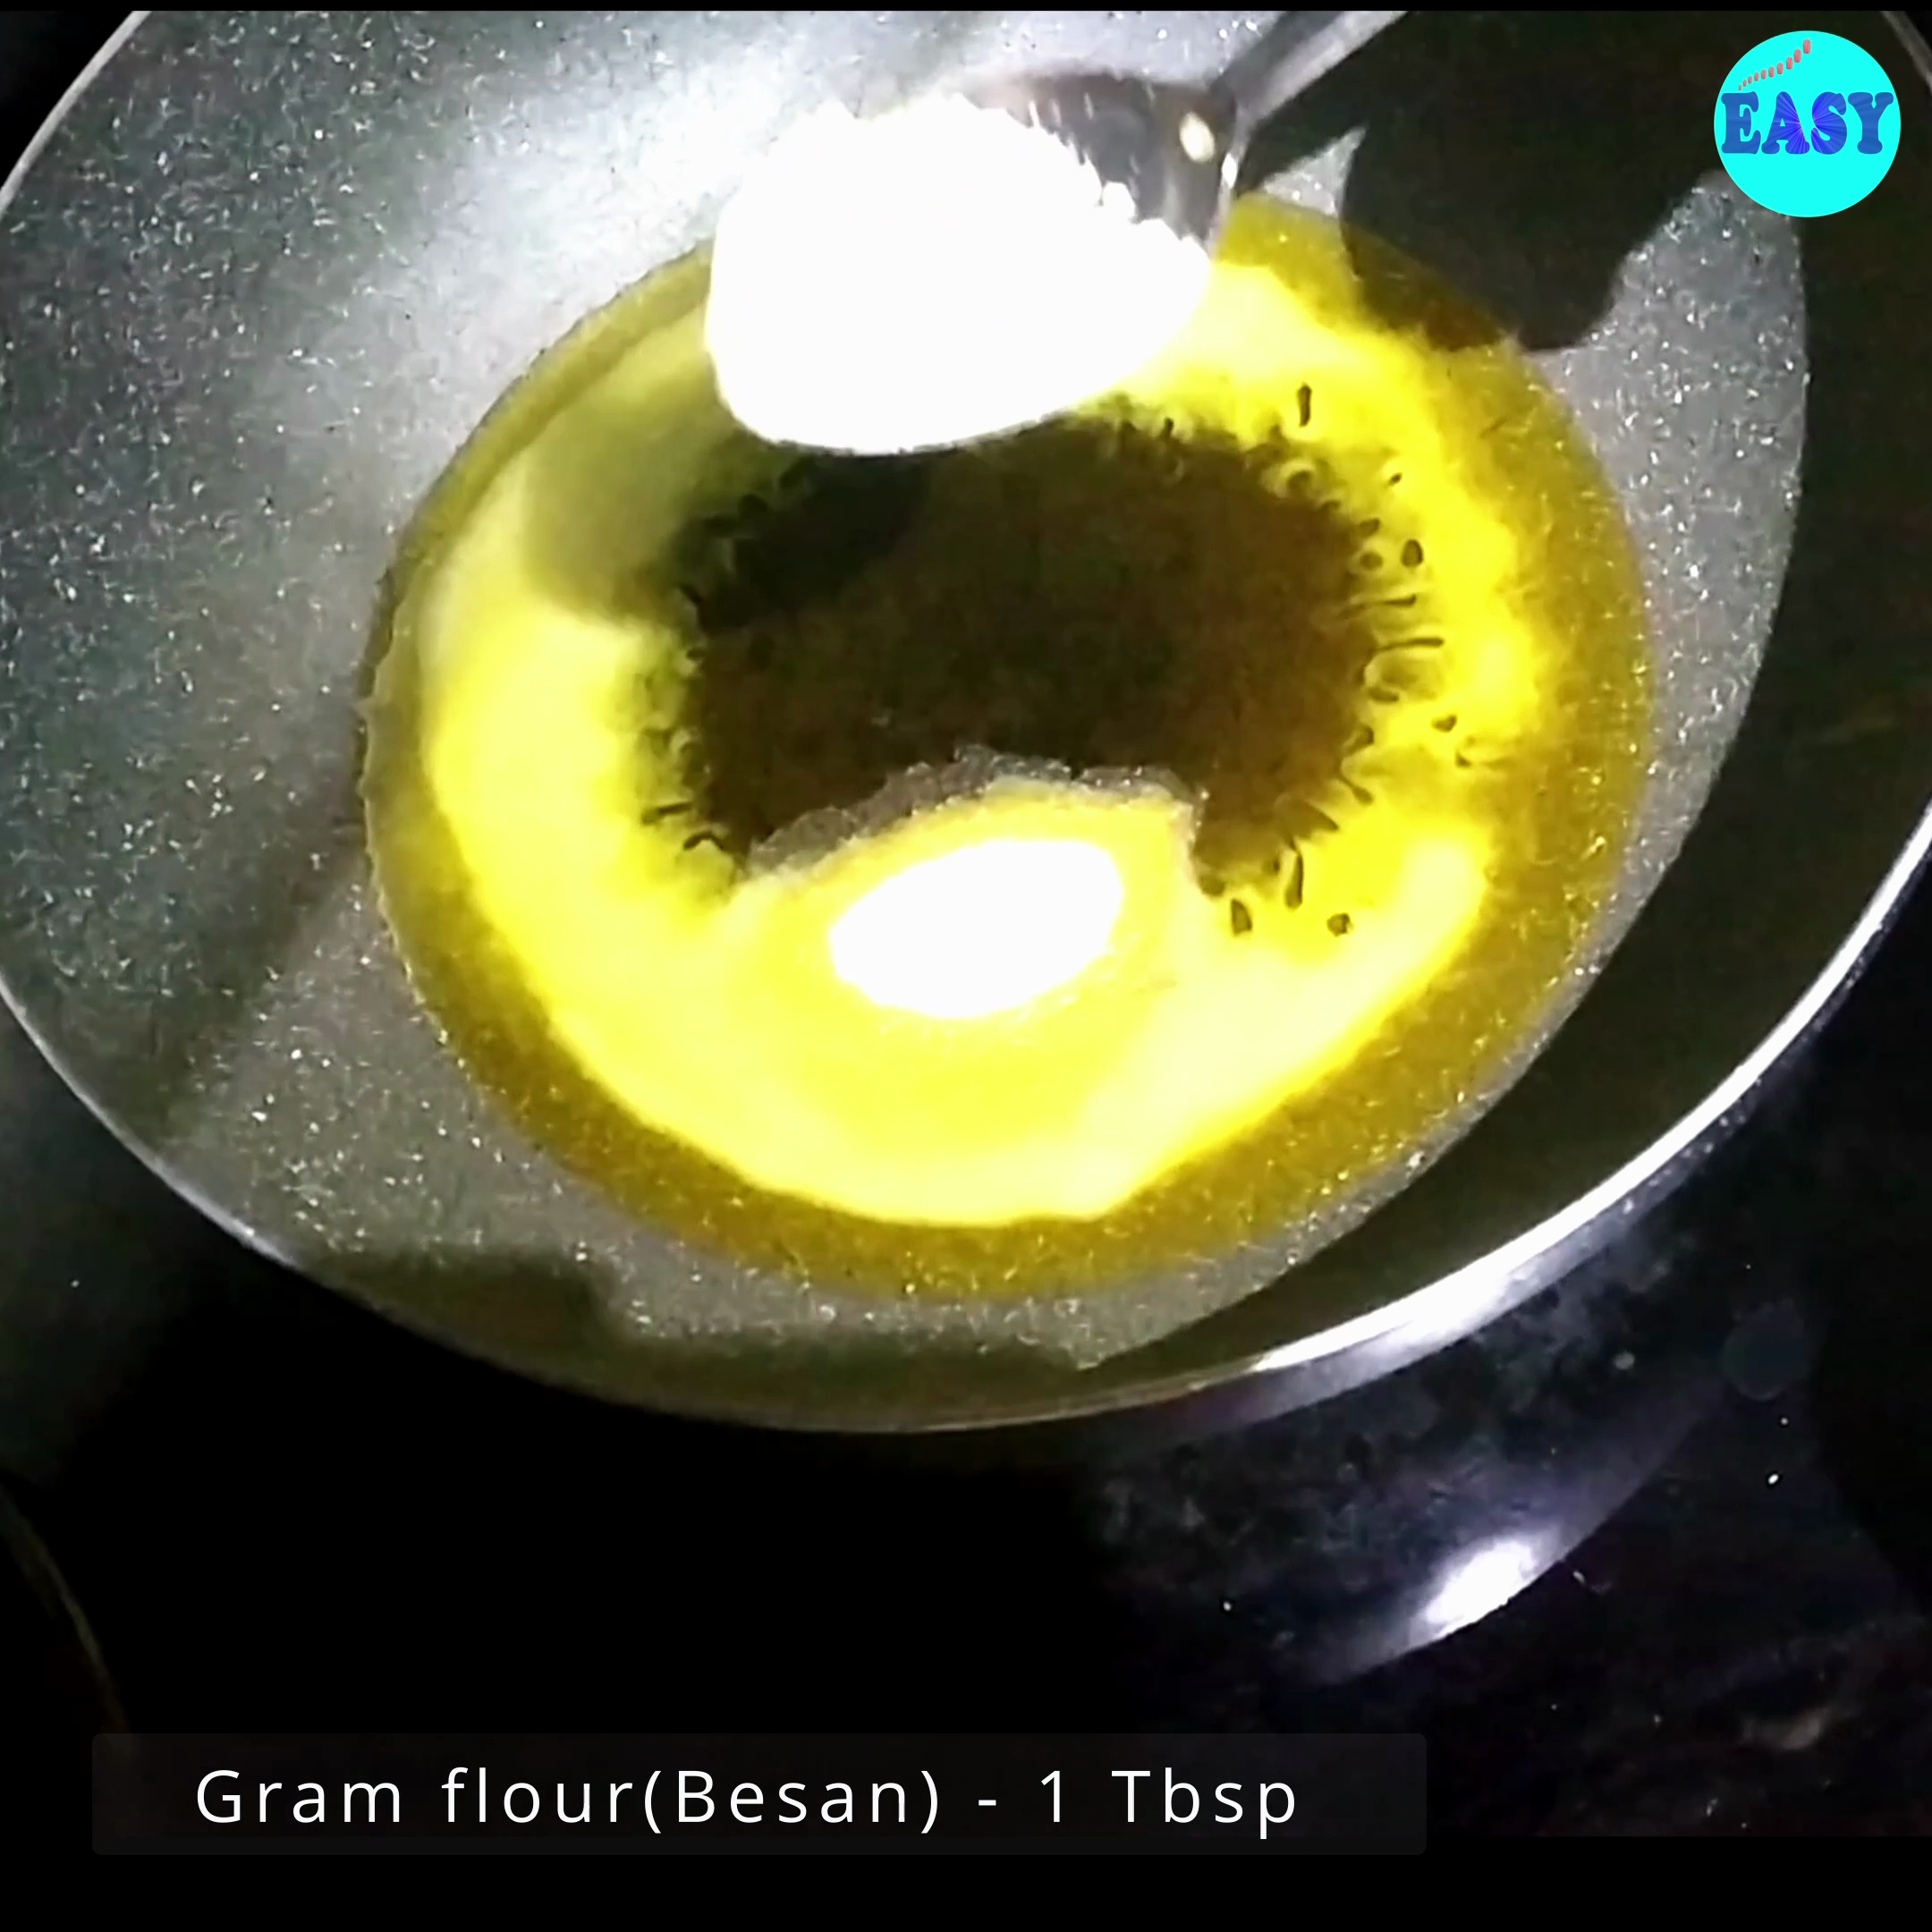 Step 5 - Once the ghee is melted, add the semolina and gram flour and roaster a minute.